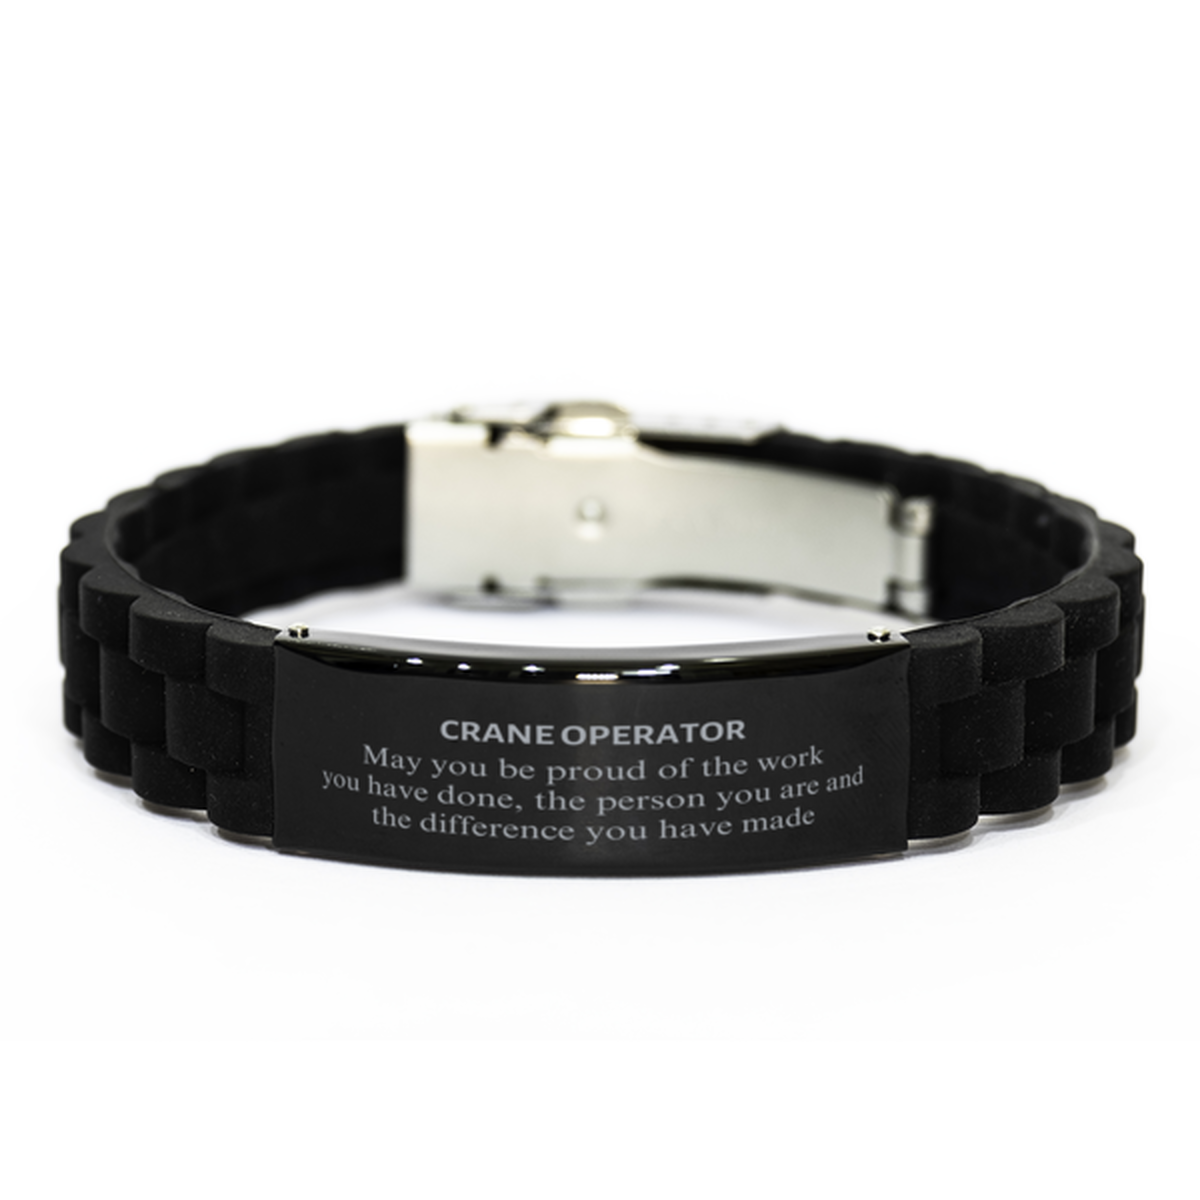 Crane Operator May you be proud of the work you have done, Retirement Crane Operator Black Glidelock Clasp Bracelet for Colleague Appreciation Gifts Amazing for Crane Operator